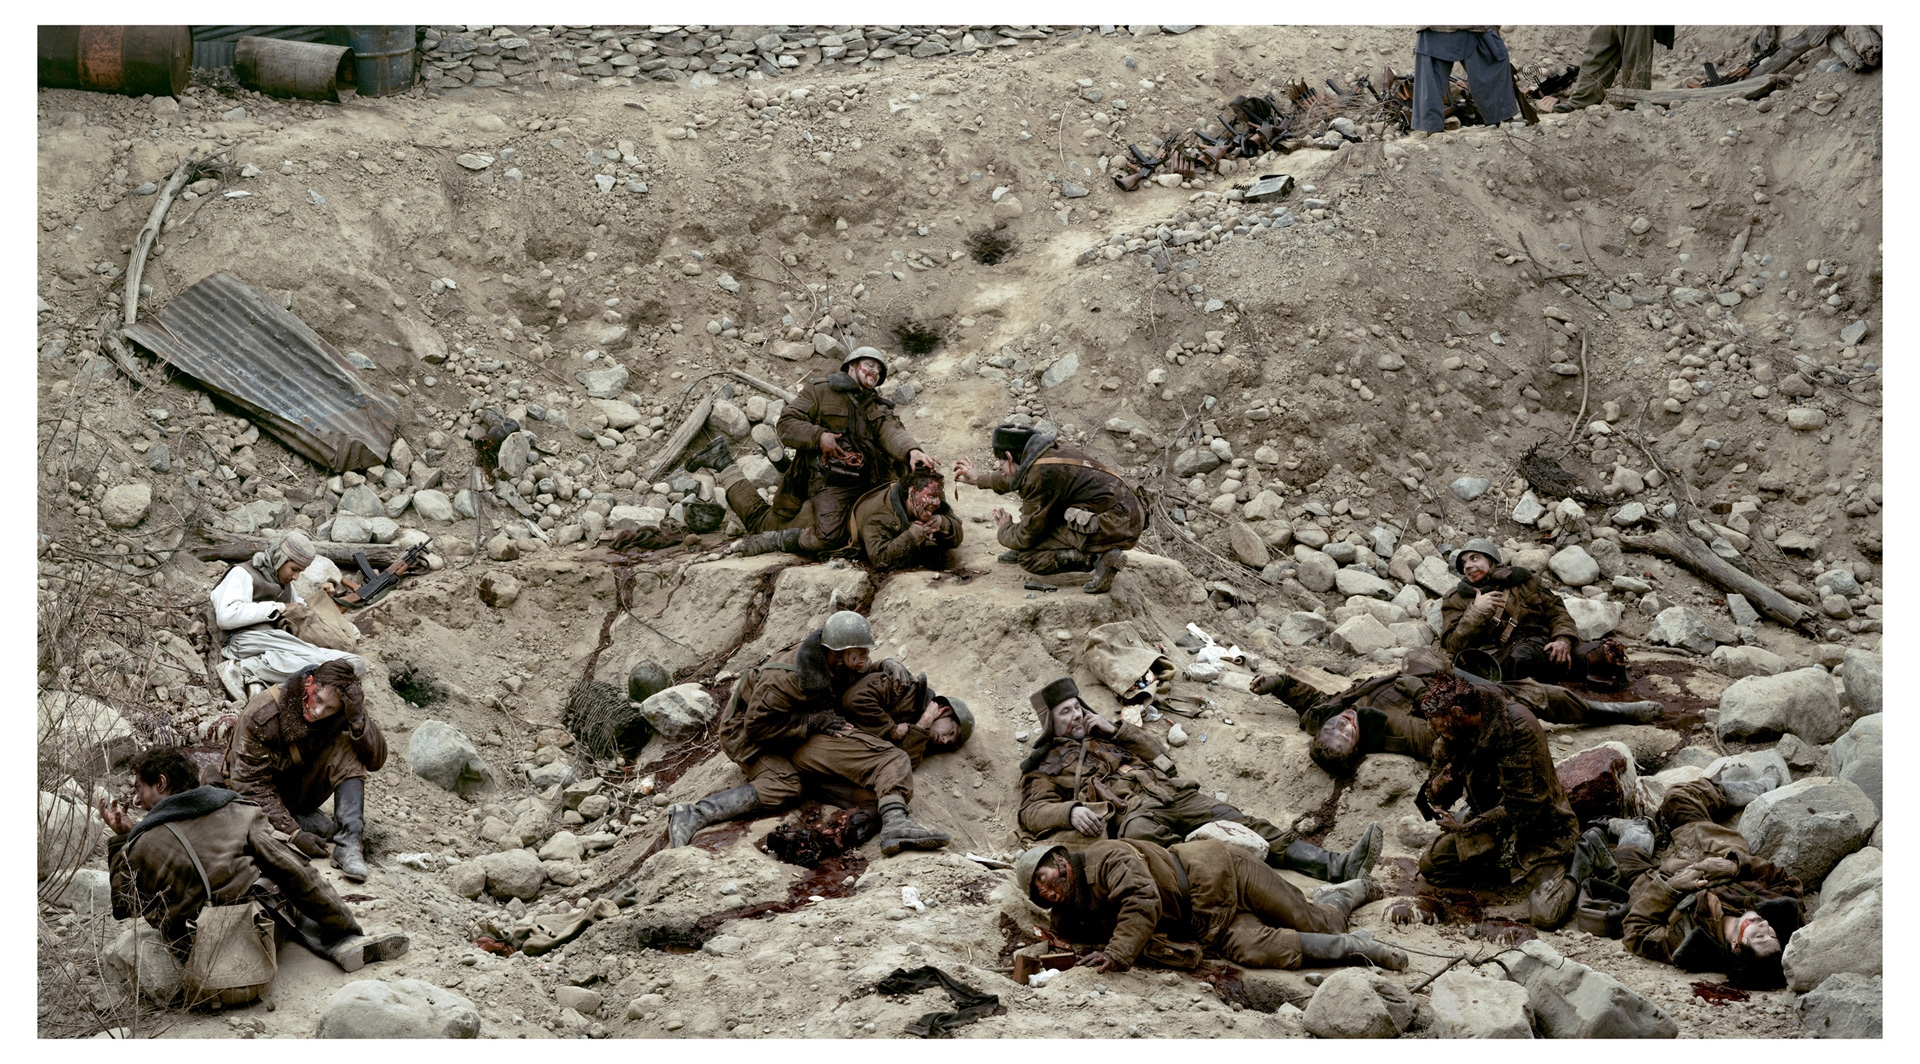 Dead Troops Talk (a vision after an ambush of a Red Army Patrol, near Moqor, Afghanistan, winter 1986) by Jeff Wall 